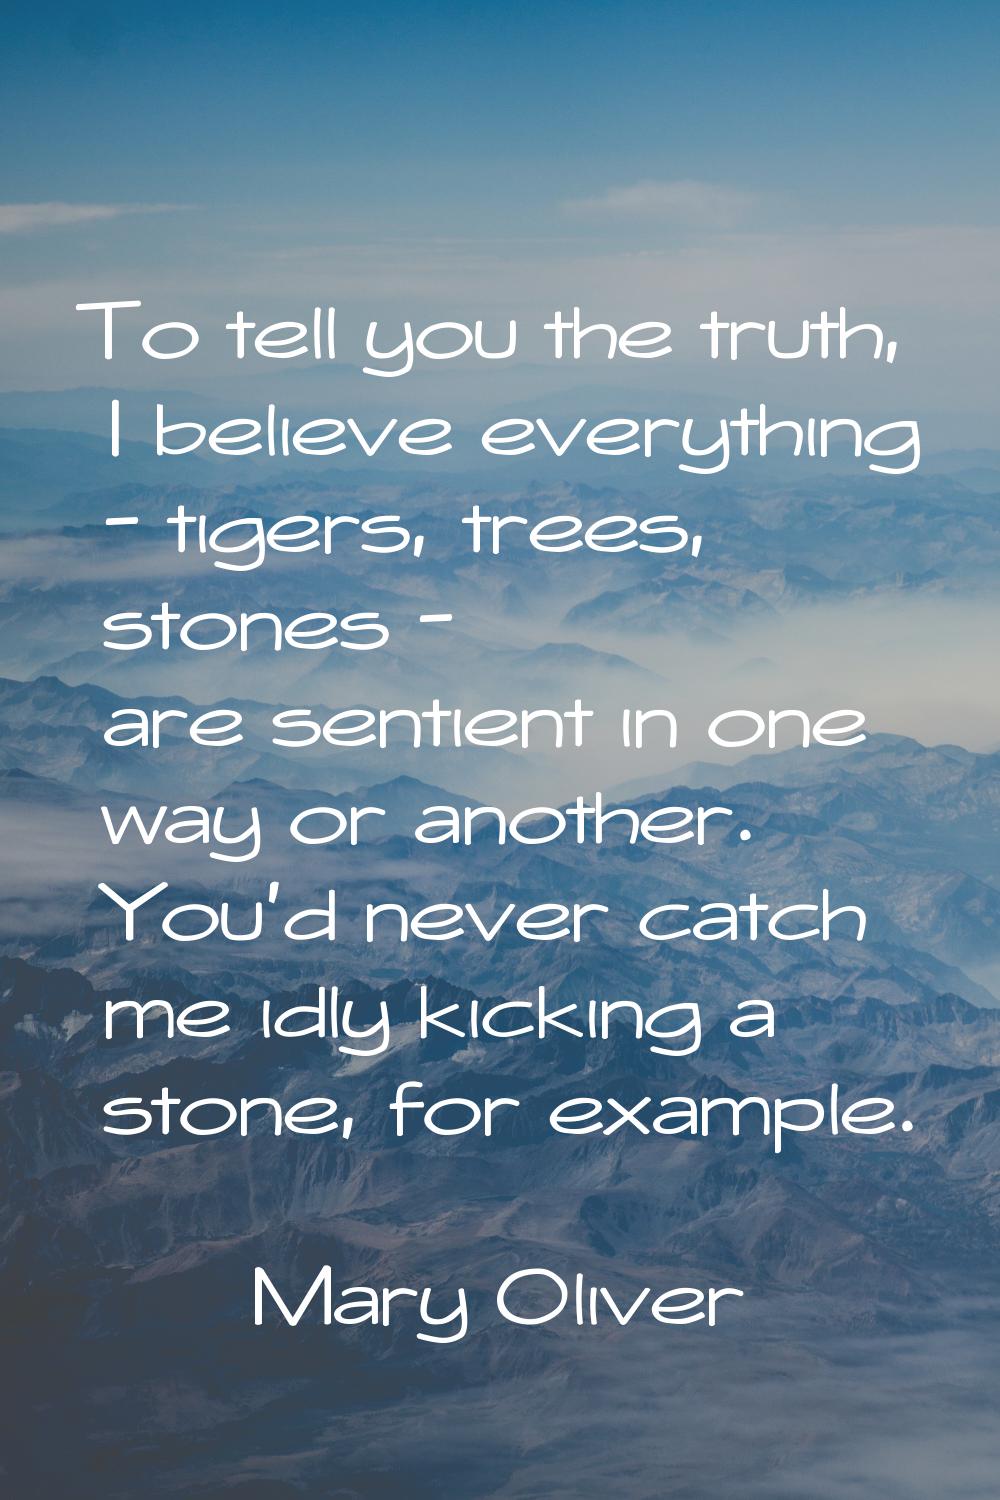 To tell you the truth, I believe everything - tigers, trees, stones - are sentient in one way or an